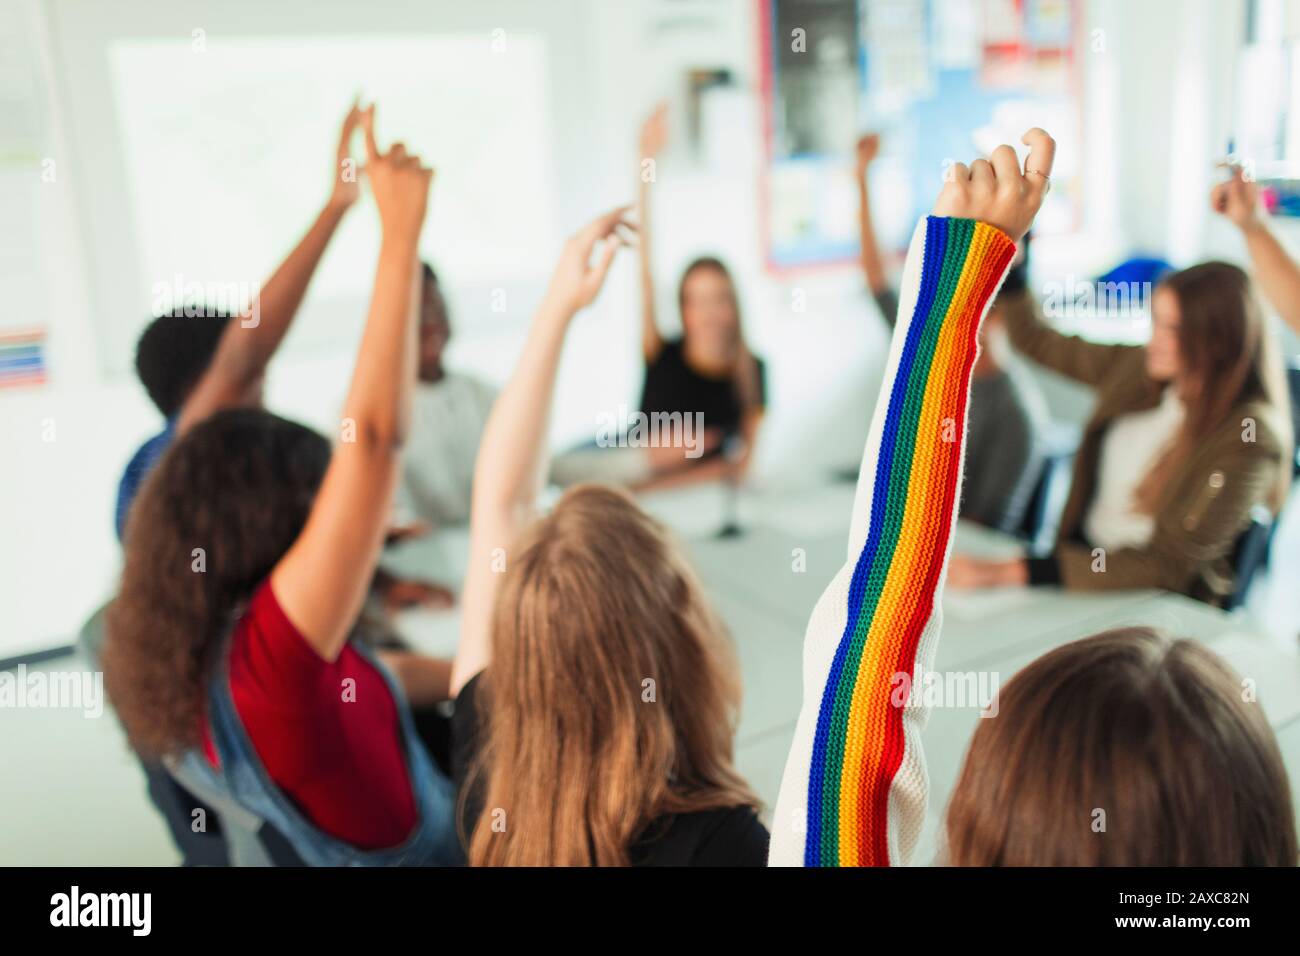 High school students with arms raised, asking questions in classroom Stock Photo